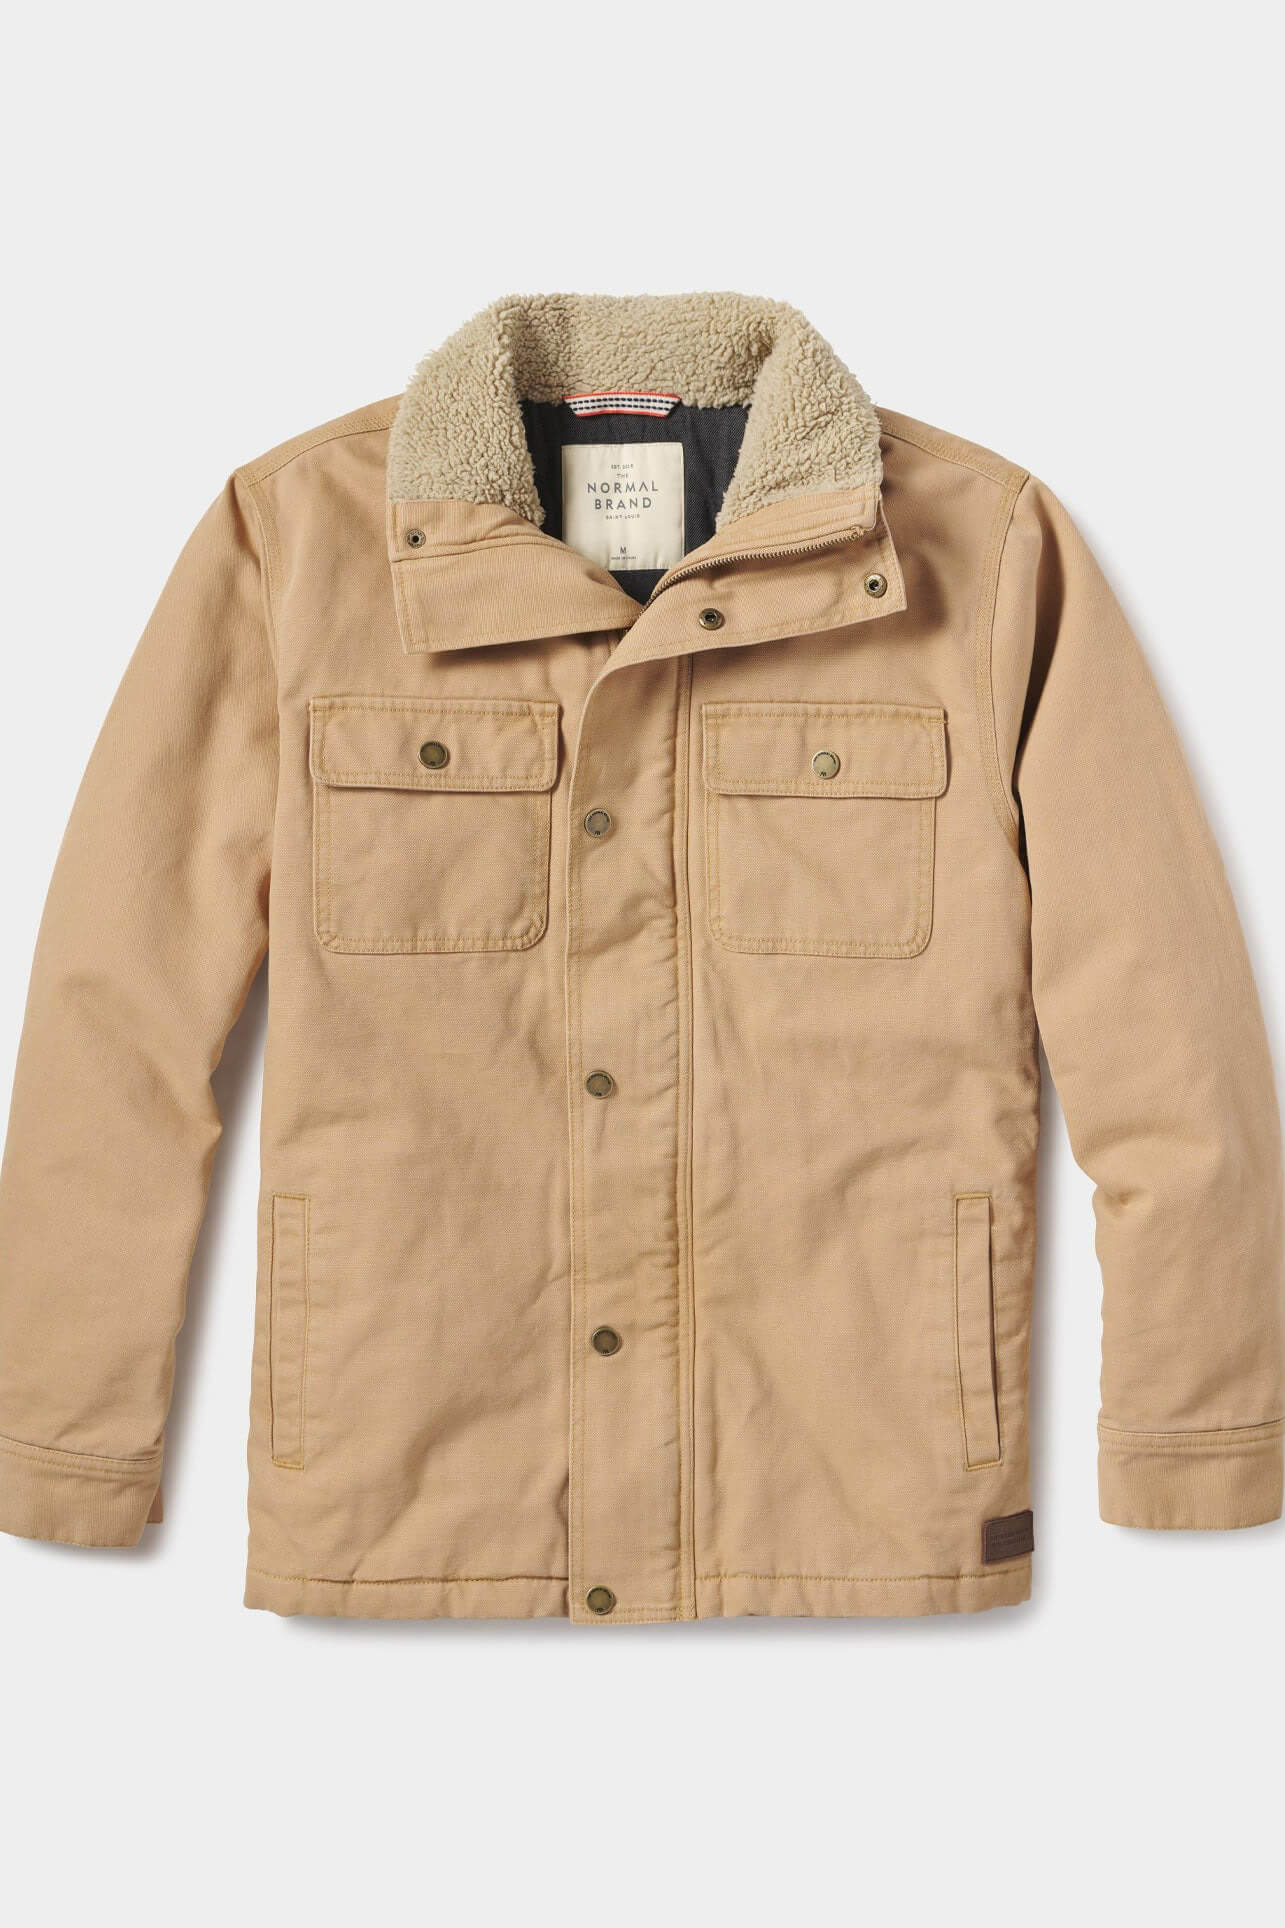 Canvas Chore Coat by The Normal Brand